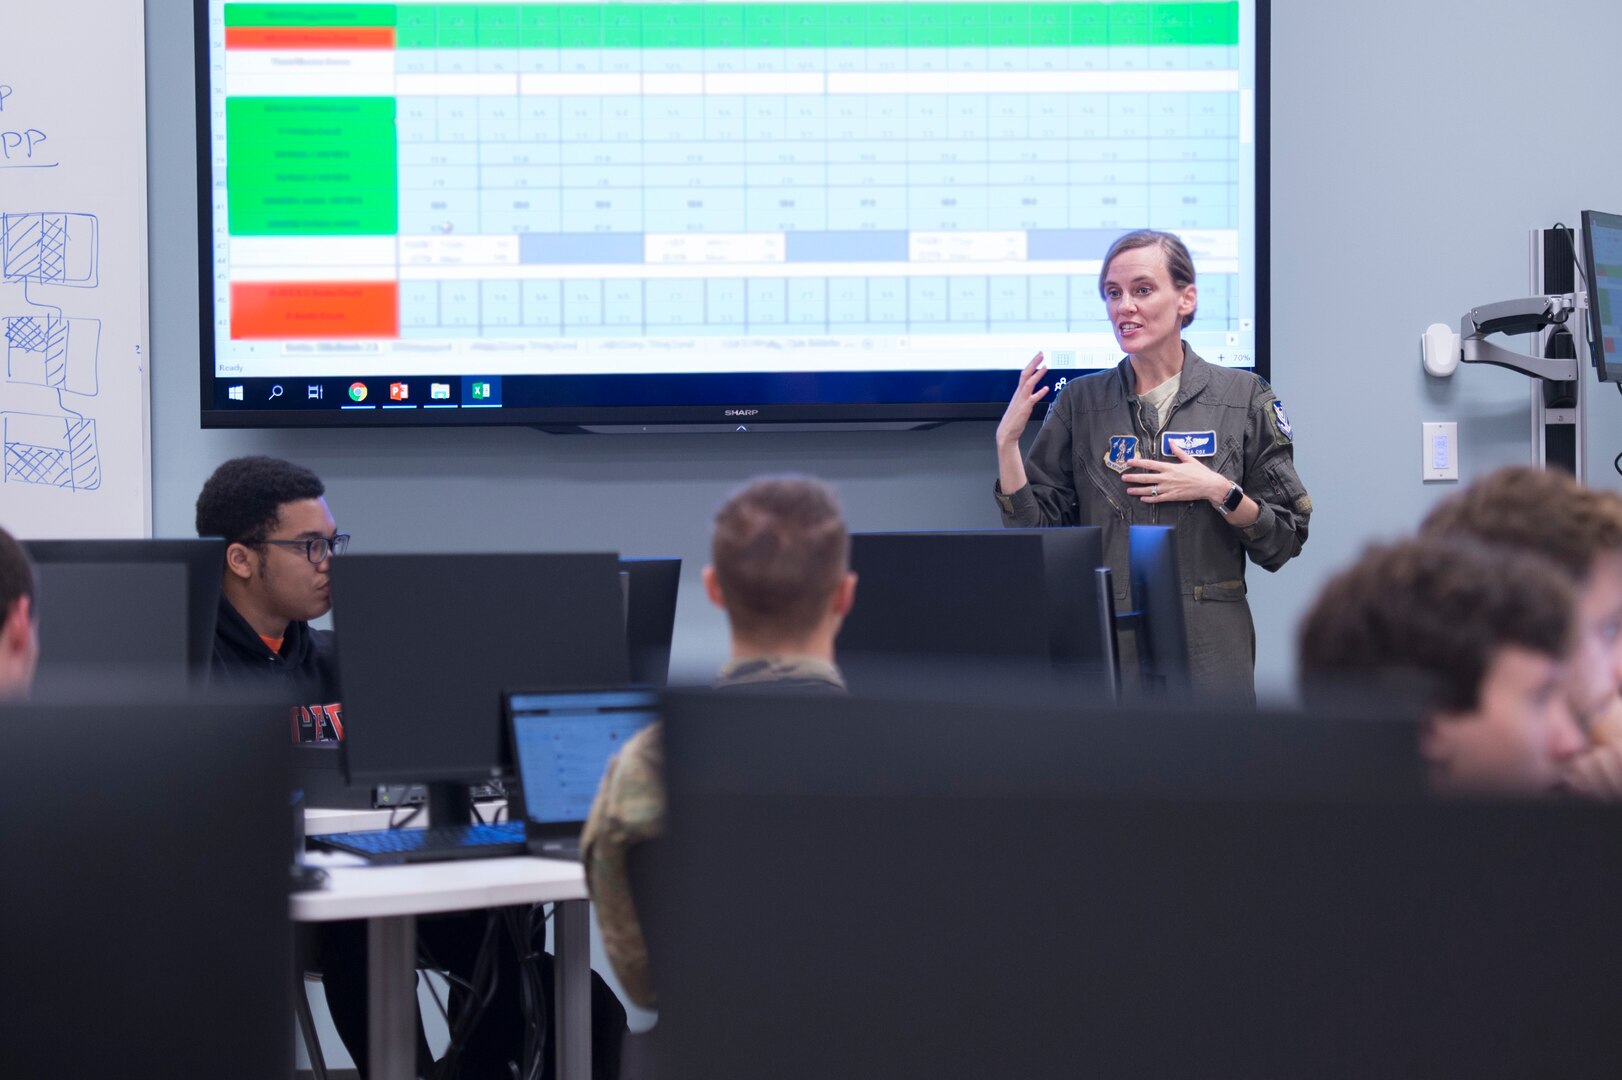 Air Force Lt. Col. Vanessa Cox, chief of scheduling with the 116th Operations Support Squadron, Georgia Air National Guard, explains scheduling processes of the E-8C Joint STARS to Mercer University computer science students at the Mercer campus in Macon, Ga., Oct. 8, 2019. The students worked on an innovation project to help reform JSTARS scheduling.